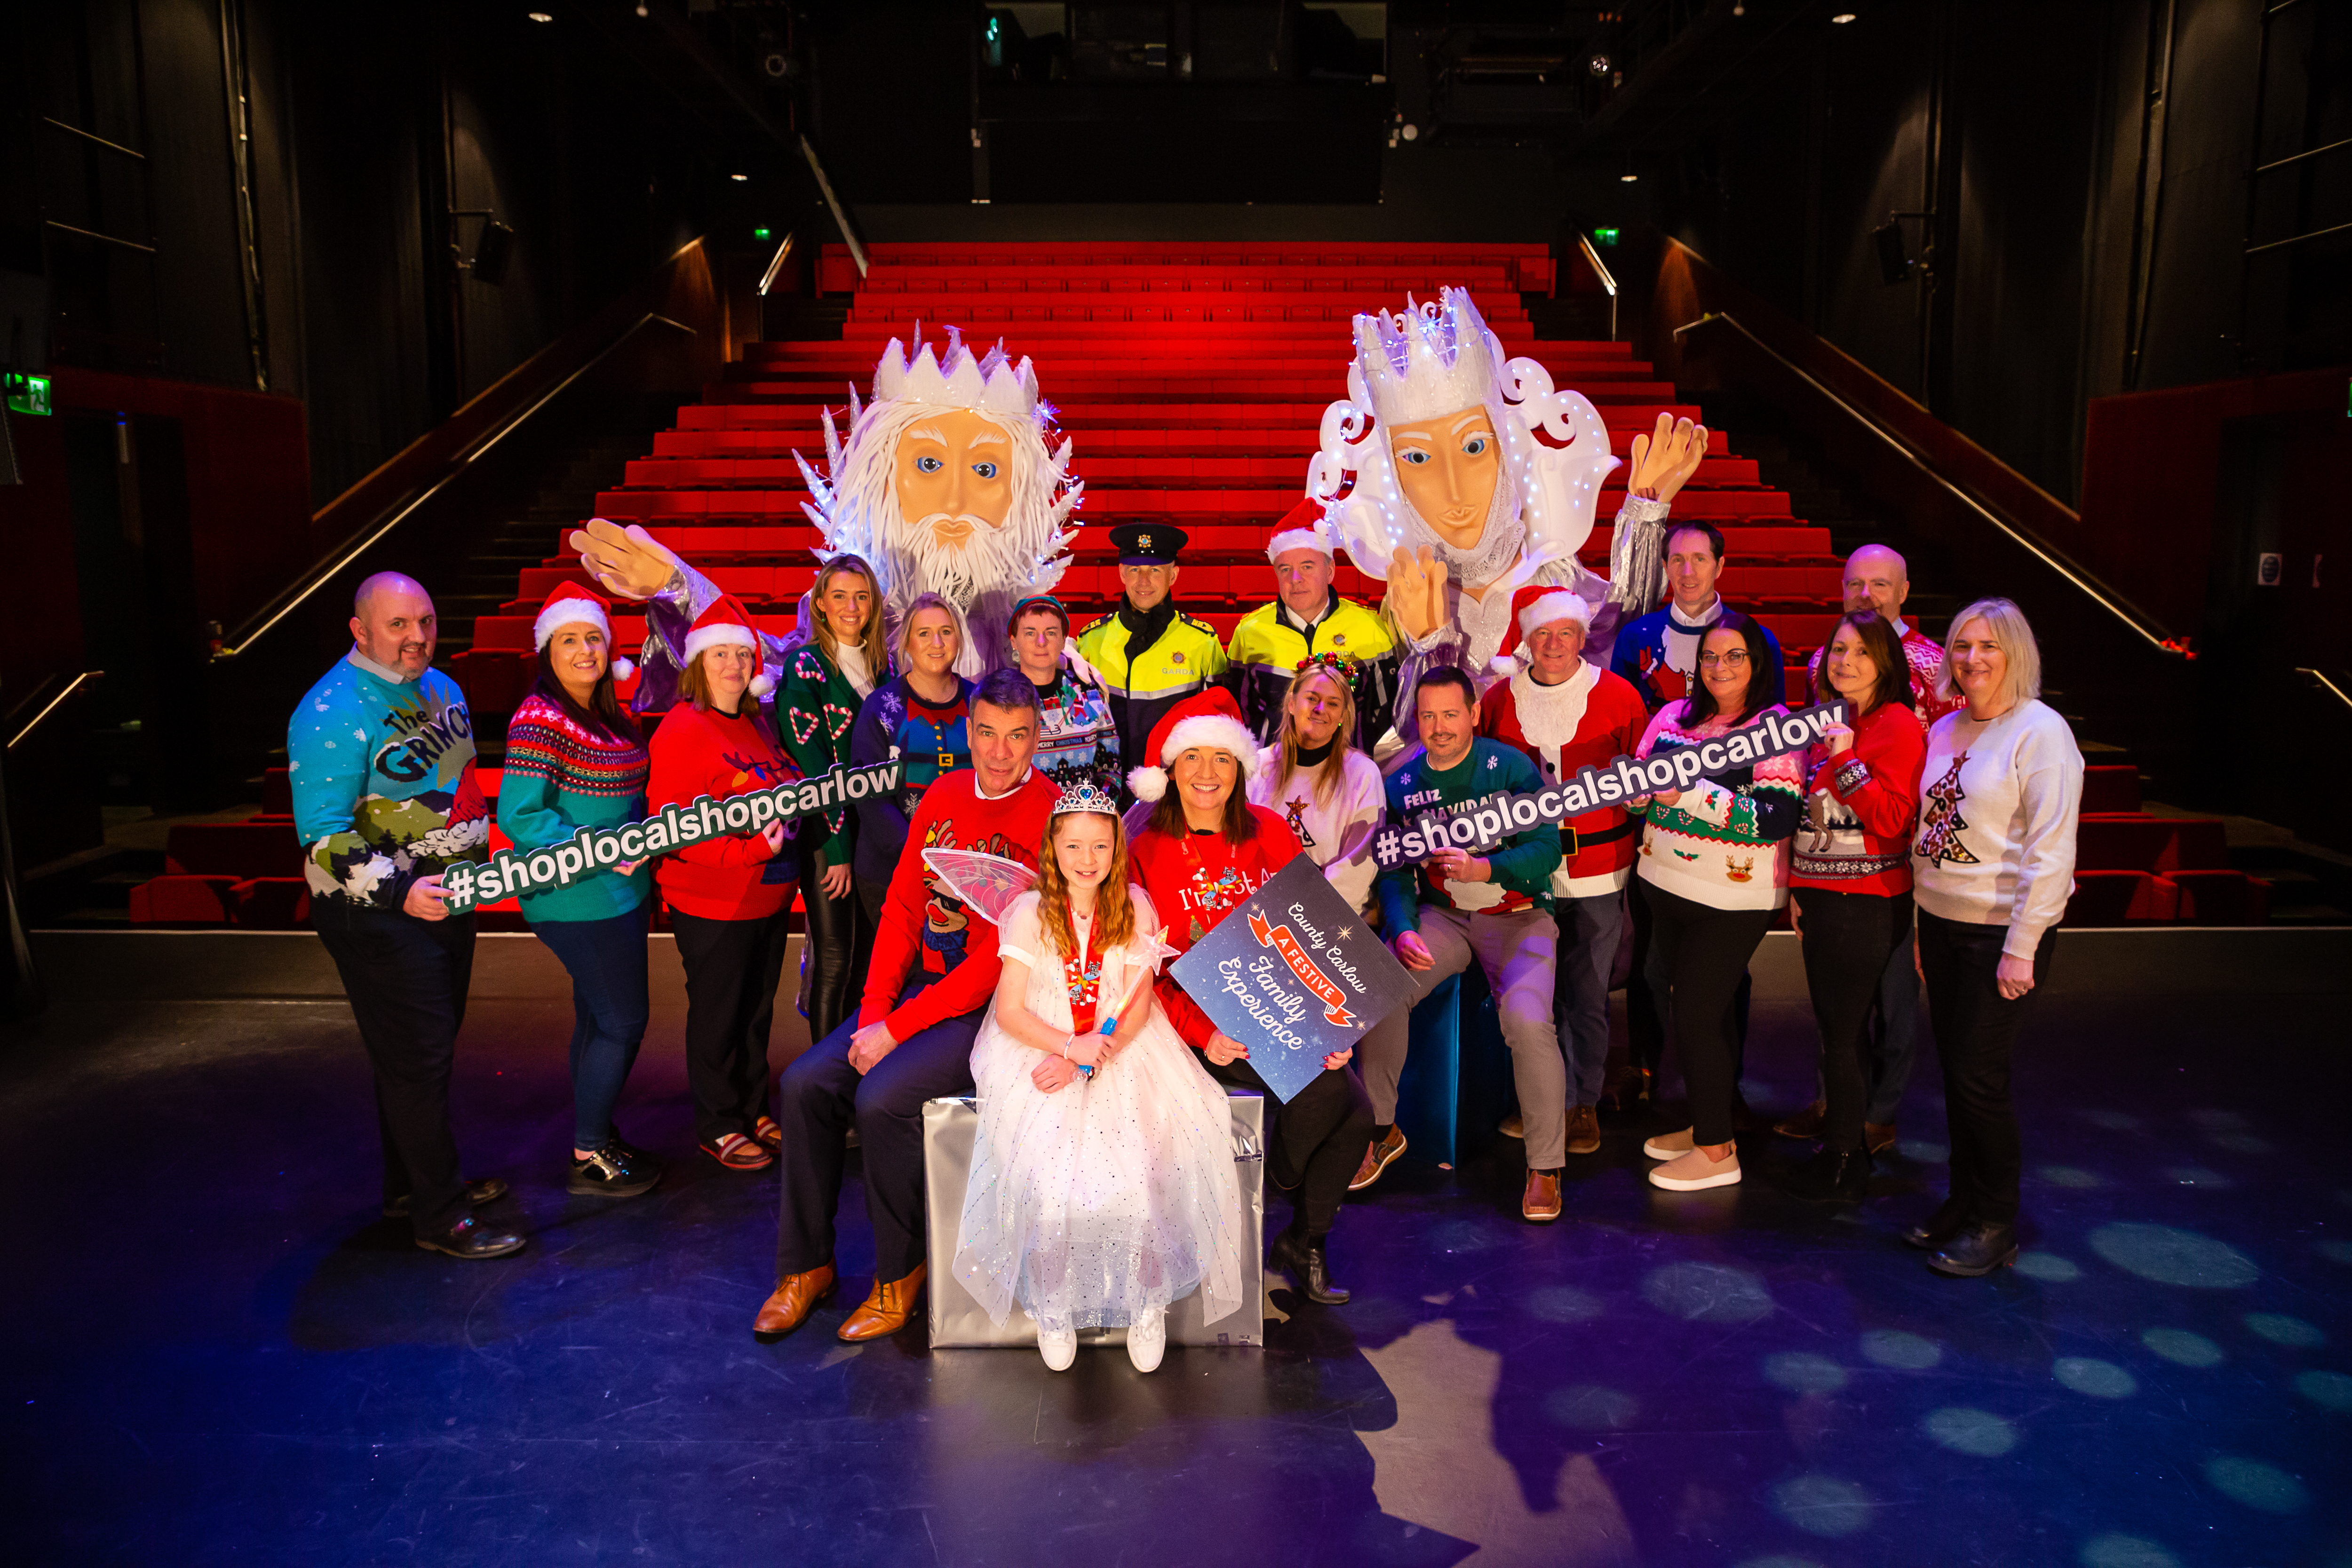 The stage is set for a ‘County Carlow – Festive Family Experience’2